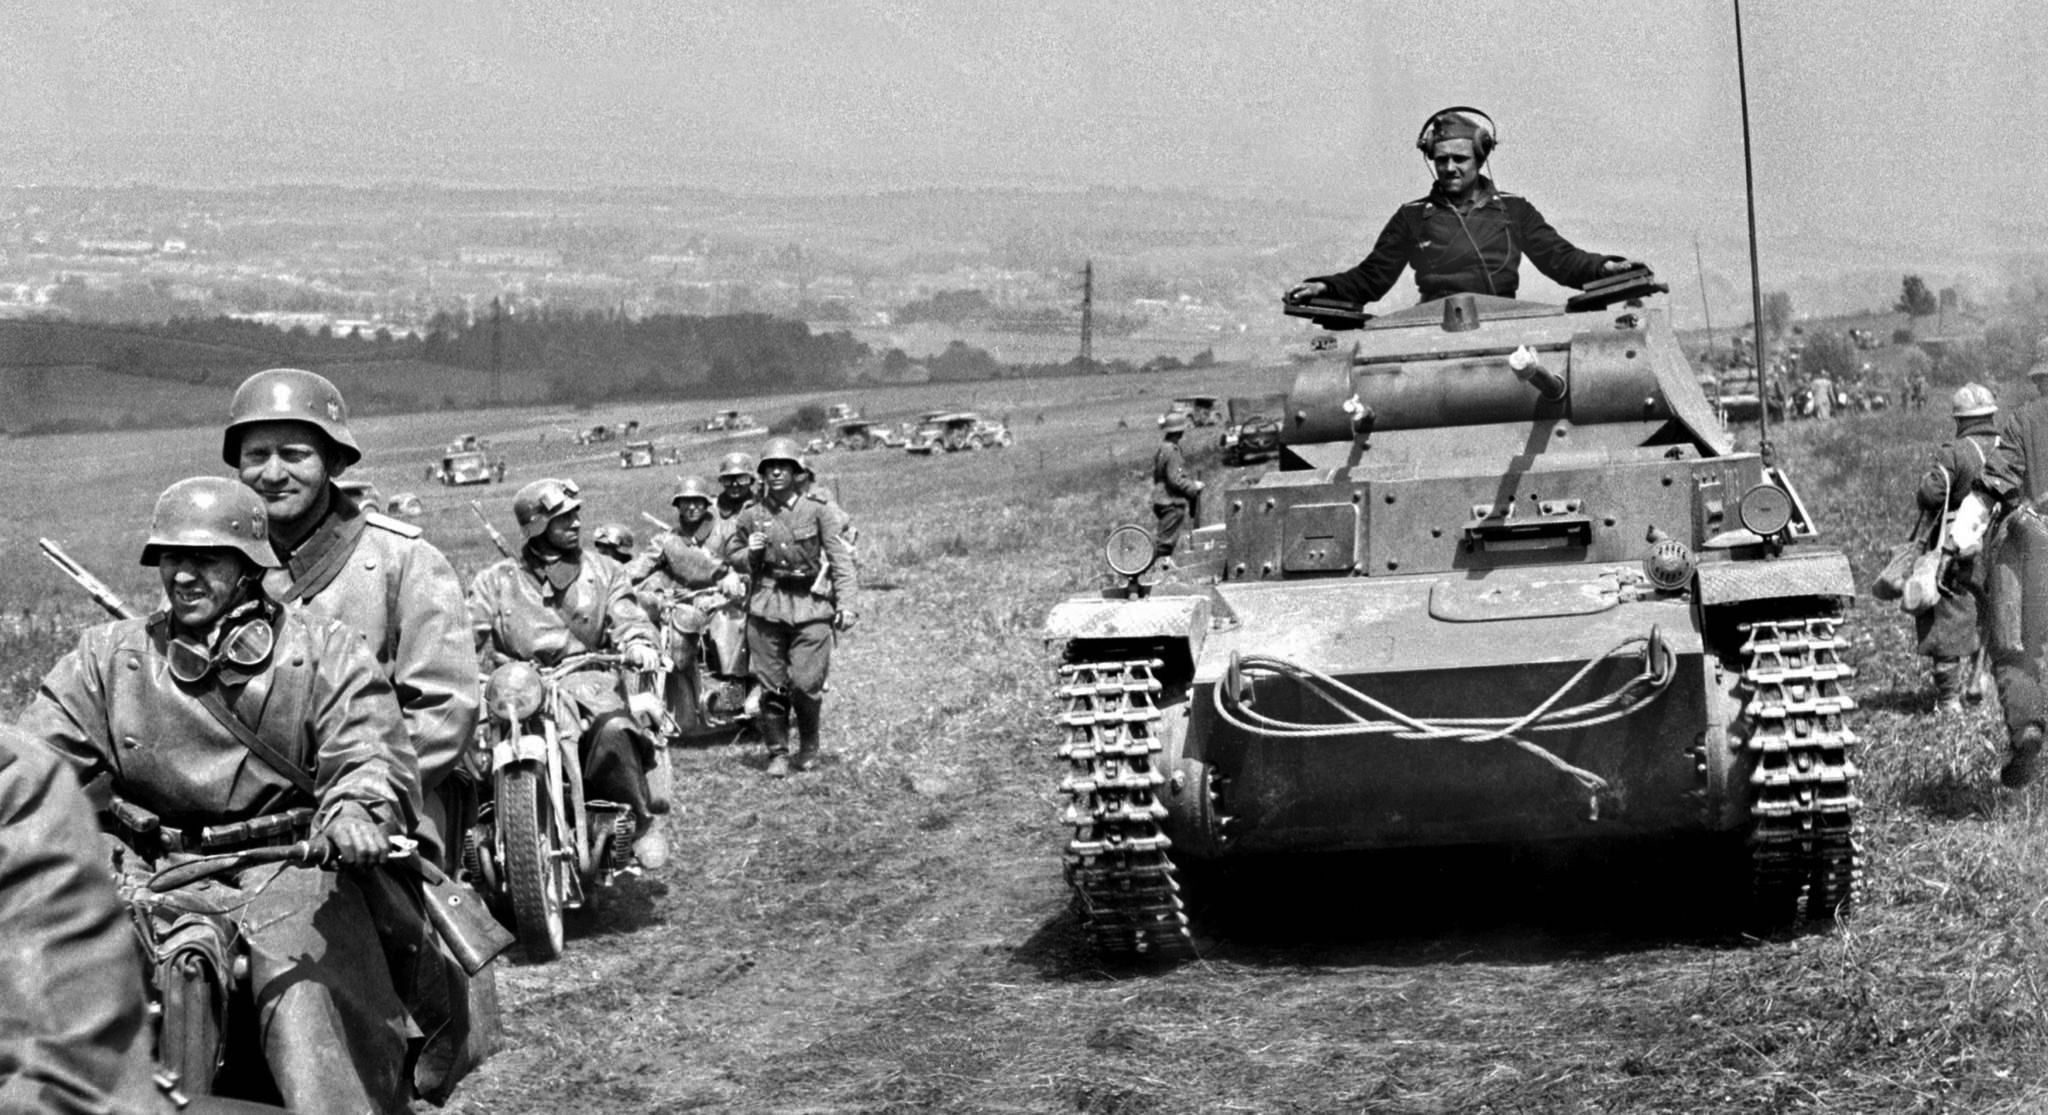 Light tanks (PzKpfw II Ausf. C), motorcycles and cars of a motorized column of the German 10th Panzer Division on the march near Sedan, France, in May 1940. Captured French soldiers are visible on the right. 